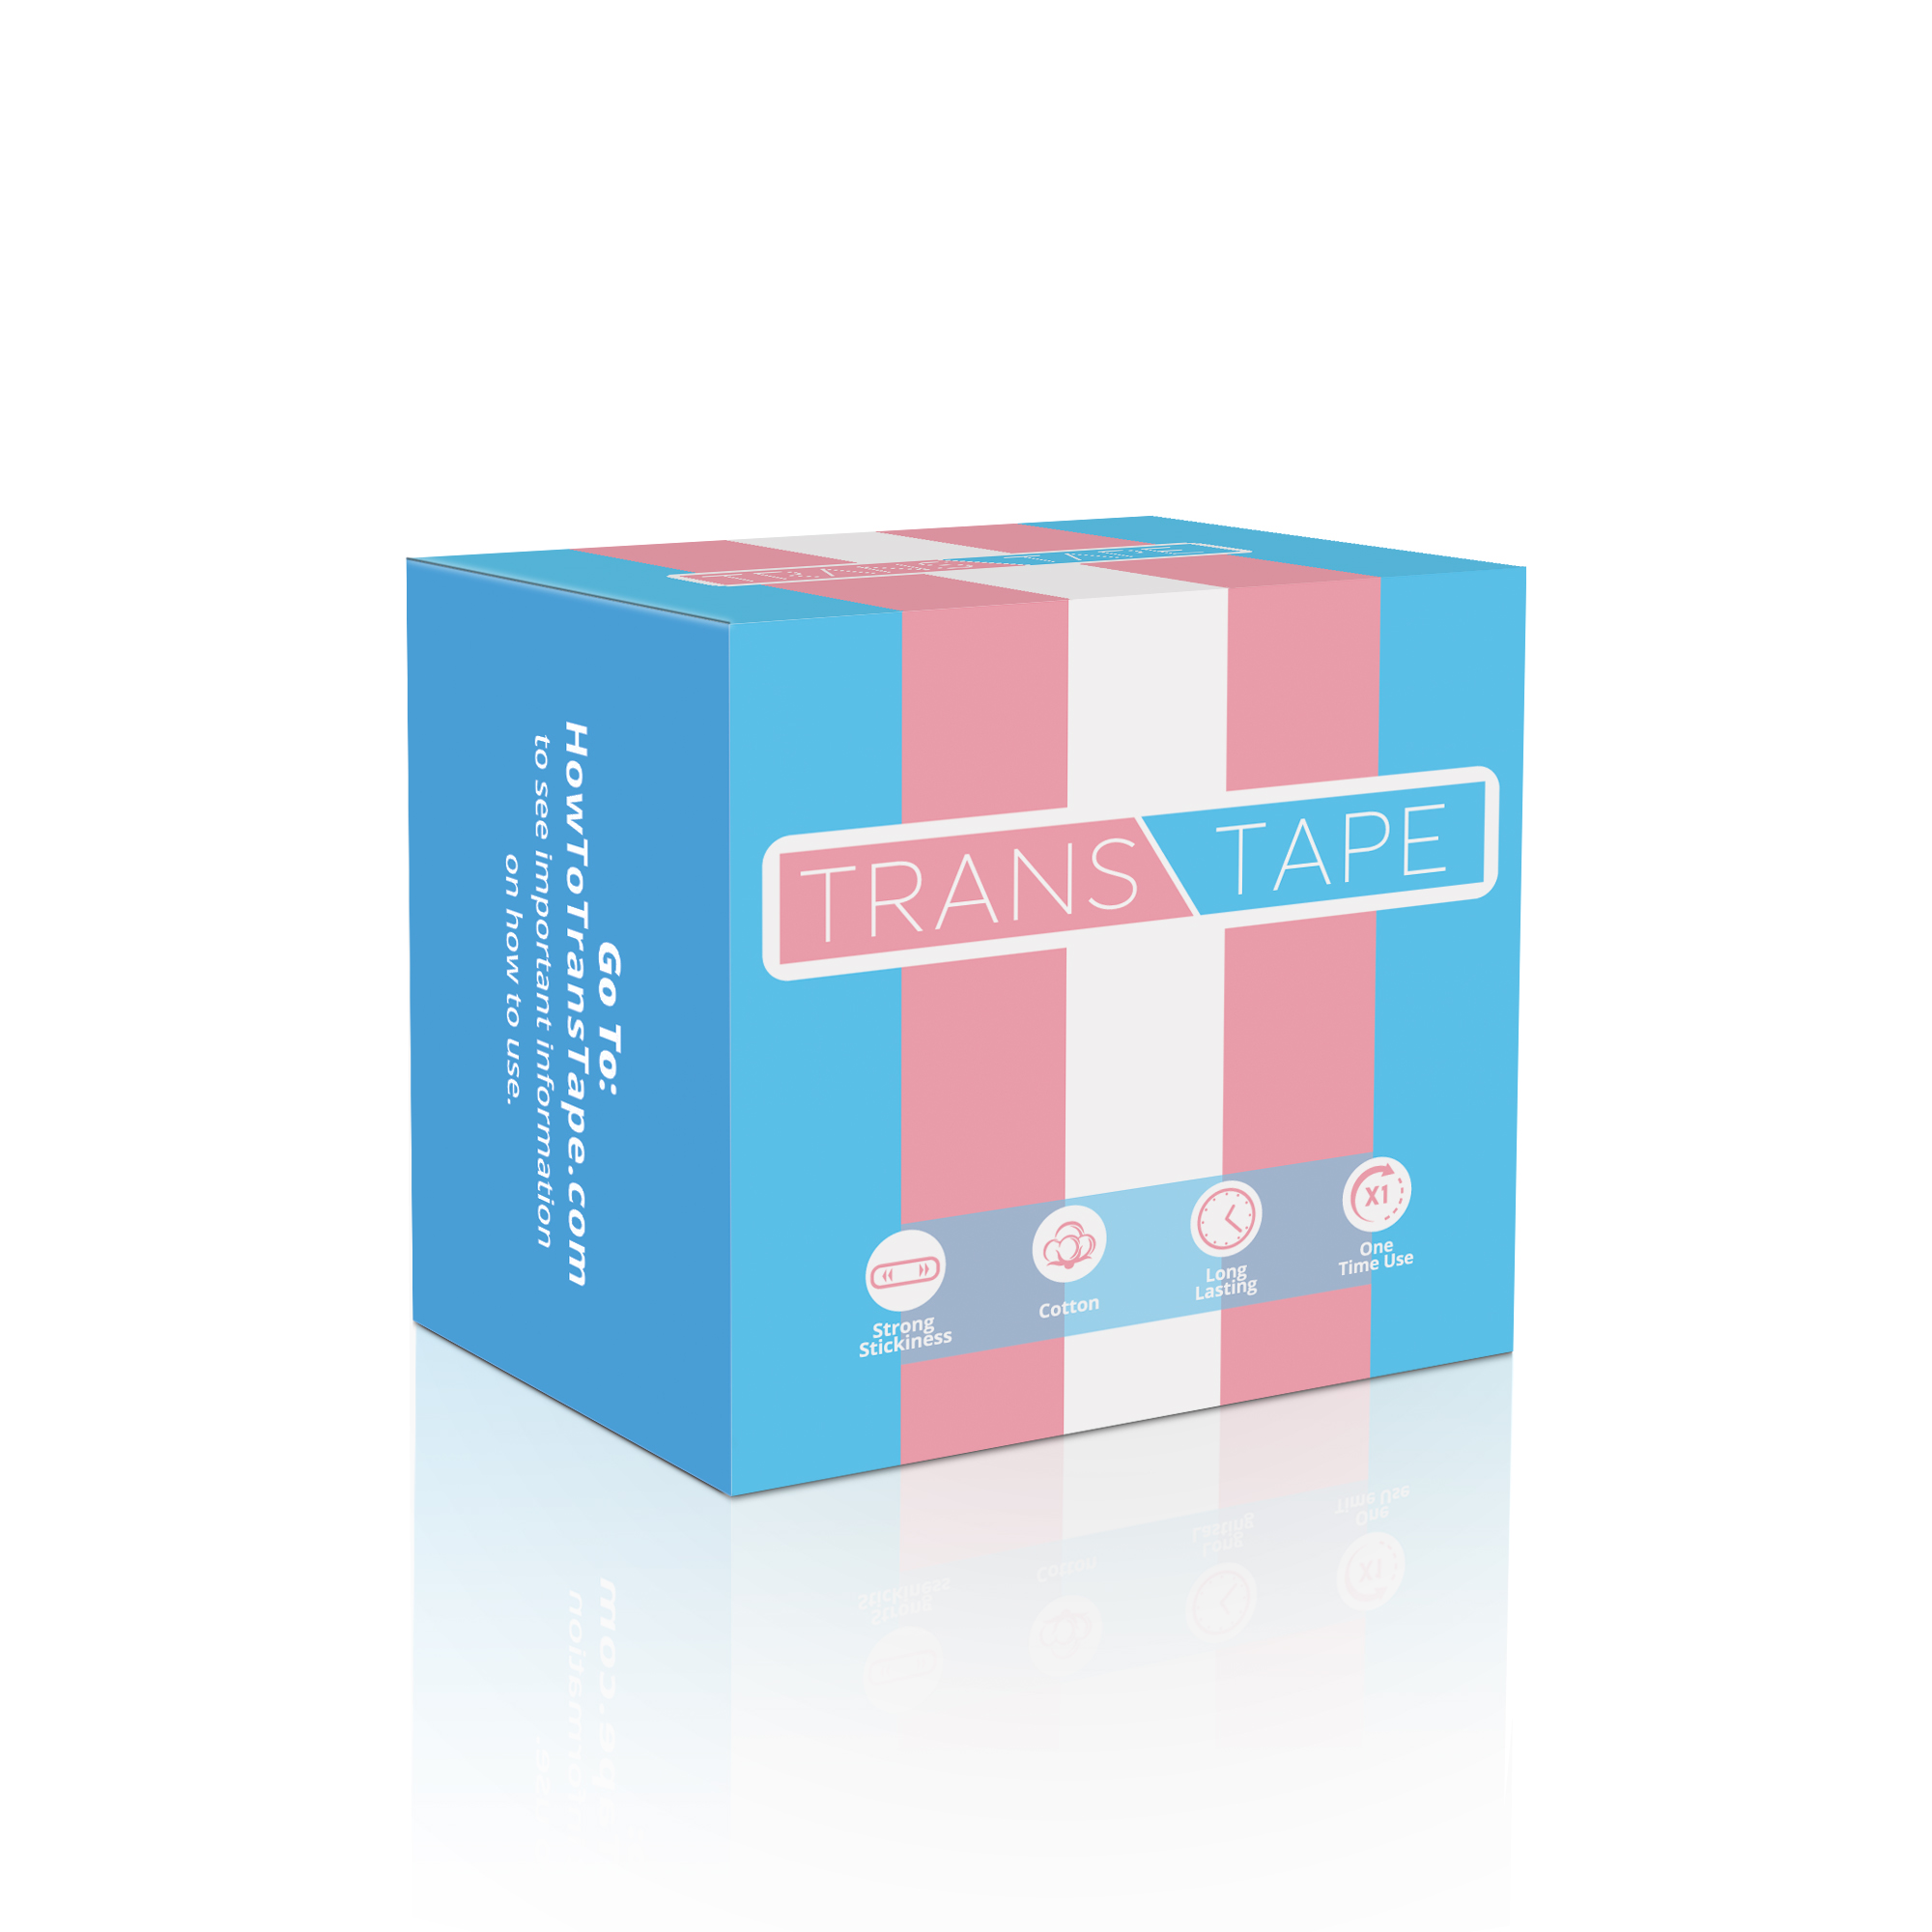 Transtape by Universal Body Labs is Now Available In the United Kingdom